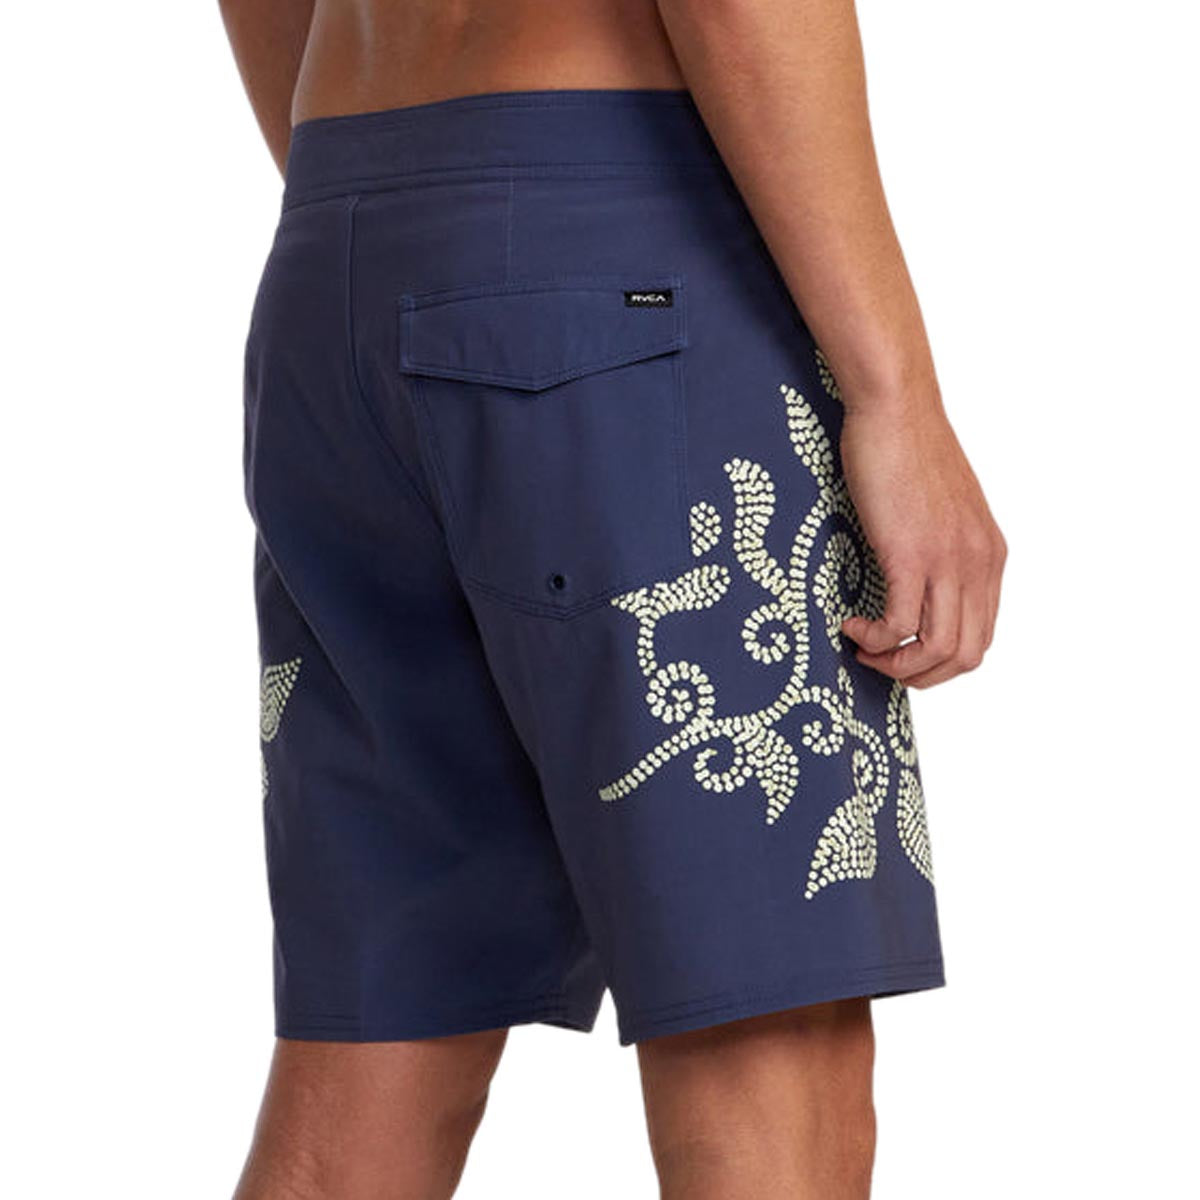 RVCA Displaced Board Shorts - Moody Blue image 4